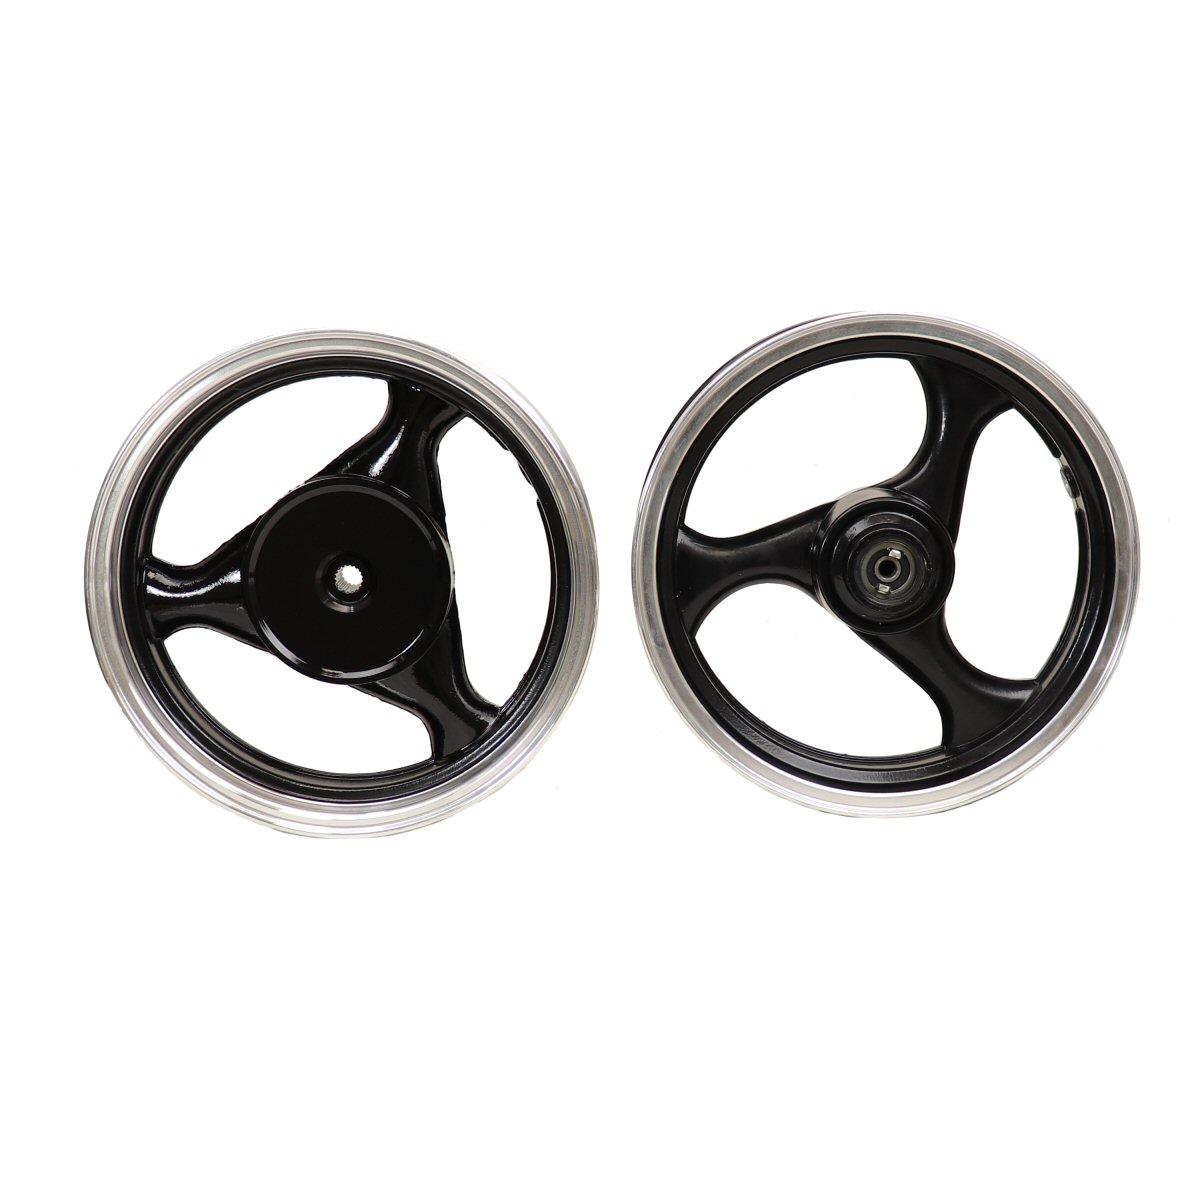 Universal Parts 13" Front Wheel for 150cc and 125cc GY6 Scooters